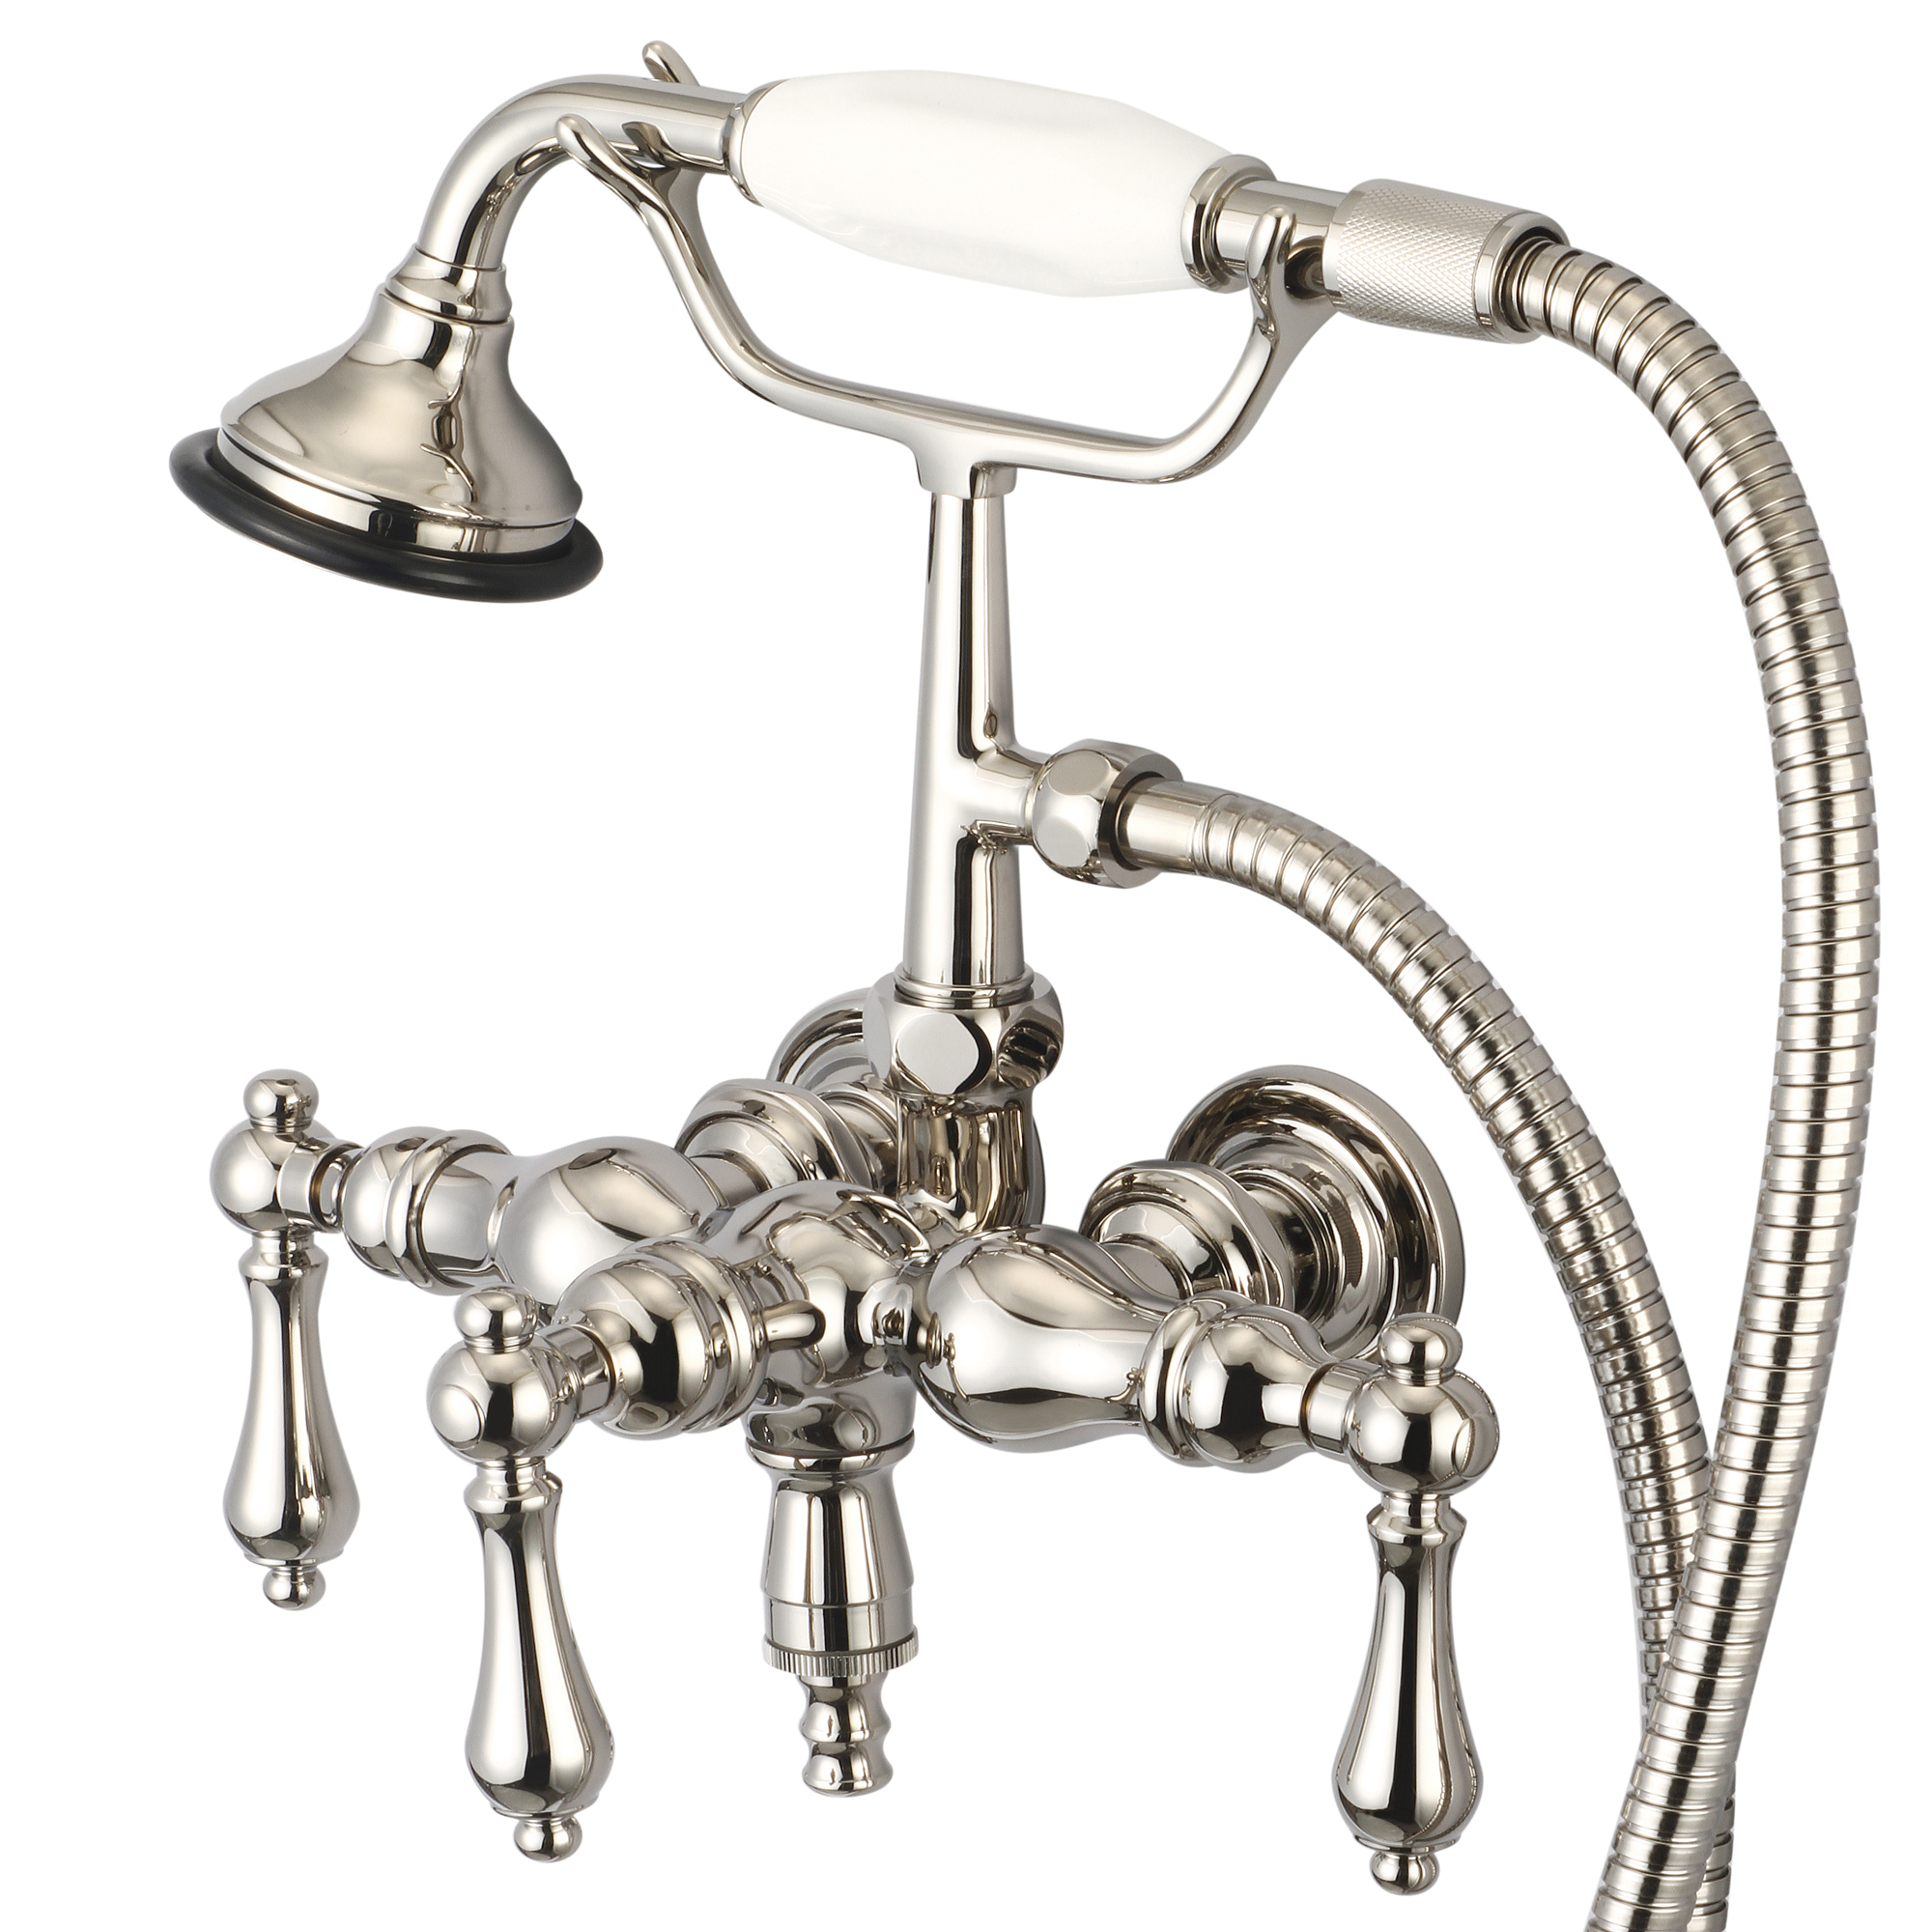 Vintage Classic 3.375 Inch Center Wall Mount Tub Faucet With Down Spout, Straight Wall Connector & Handheld Shower in Polished Nickel (PVD) Finish With Metal Lever Handles Without Labels